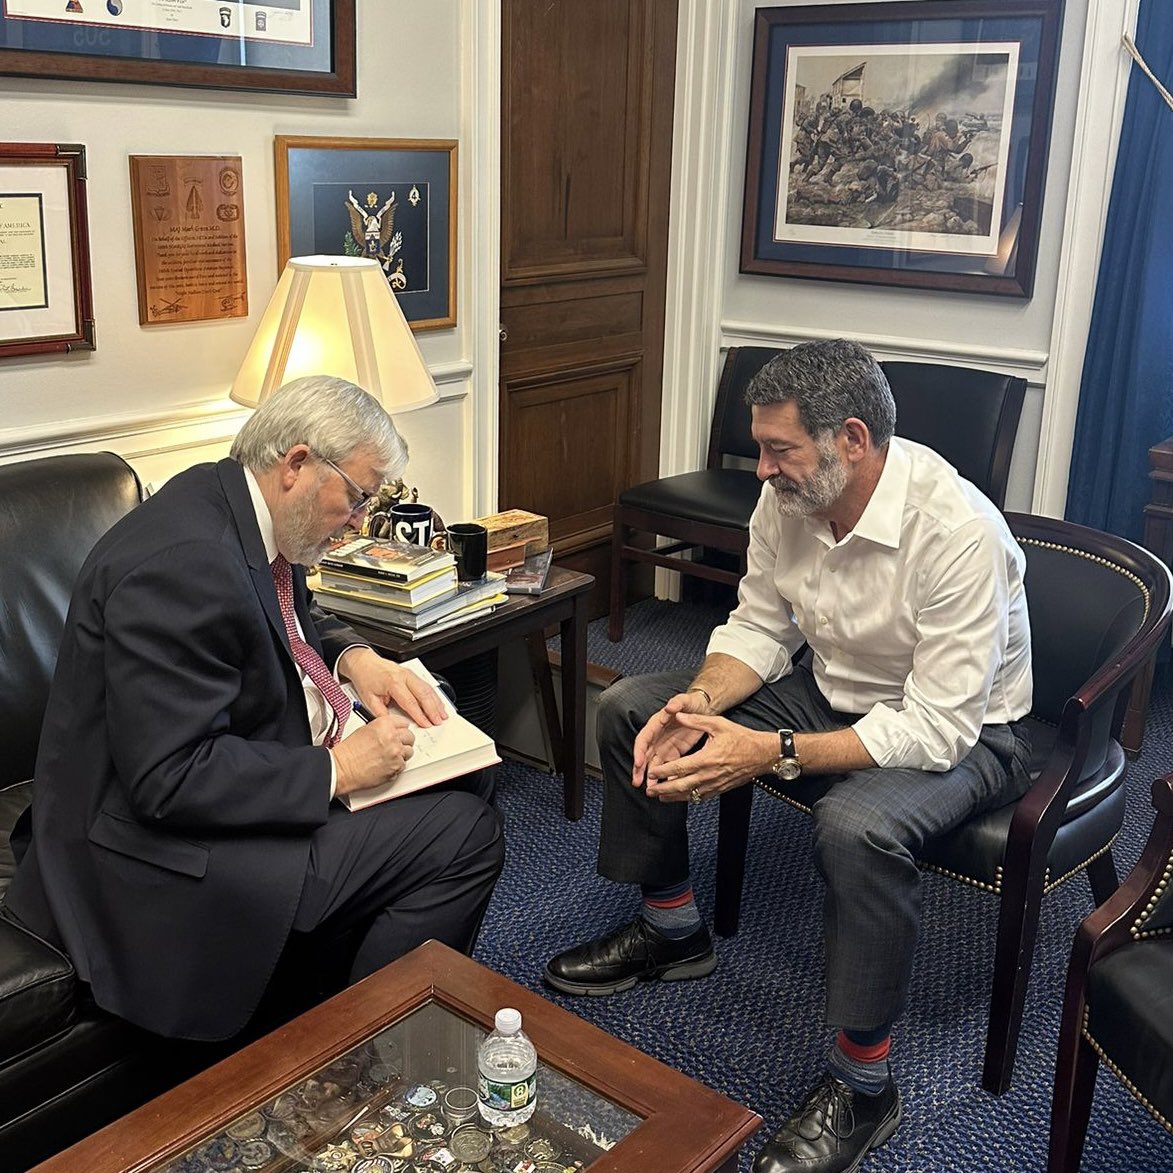 .@RepMarkGreen is a steadfast supporter of Australia and AUKUS, and what the partnership can deliver for the Indo-Pacific. We discussed homeland security-related issues and avenues for enhanced collaboration and cooperation between our two nations.